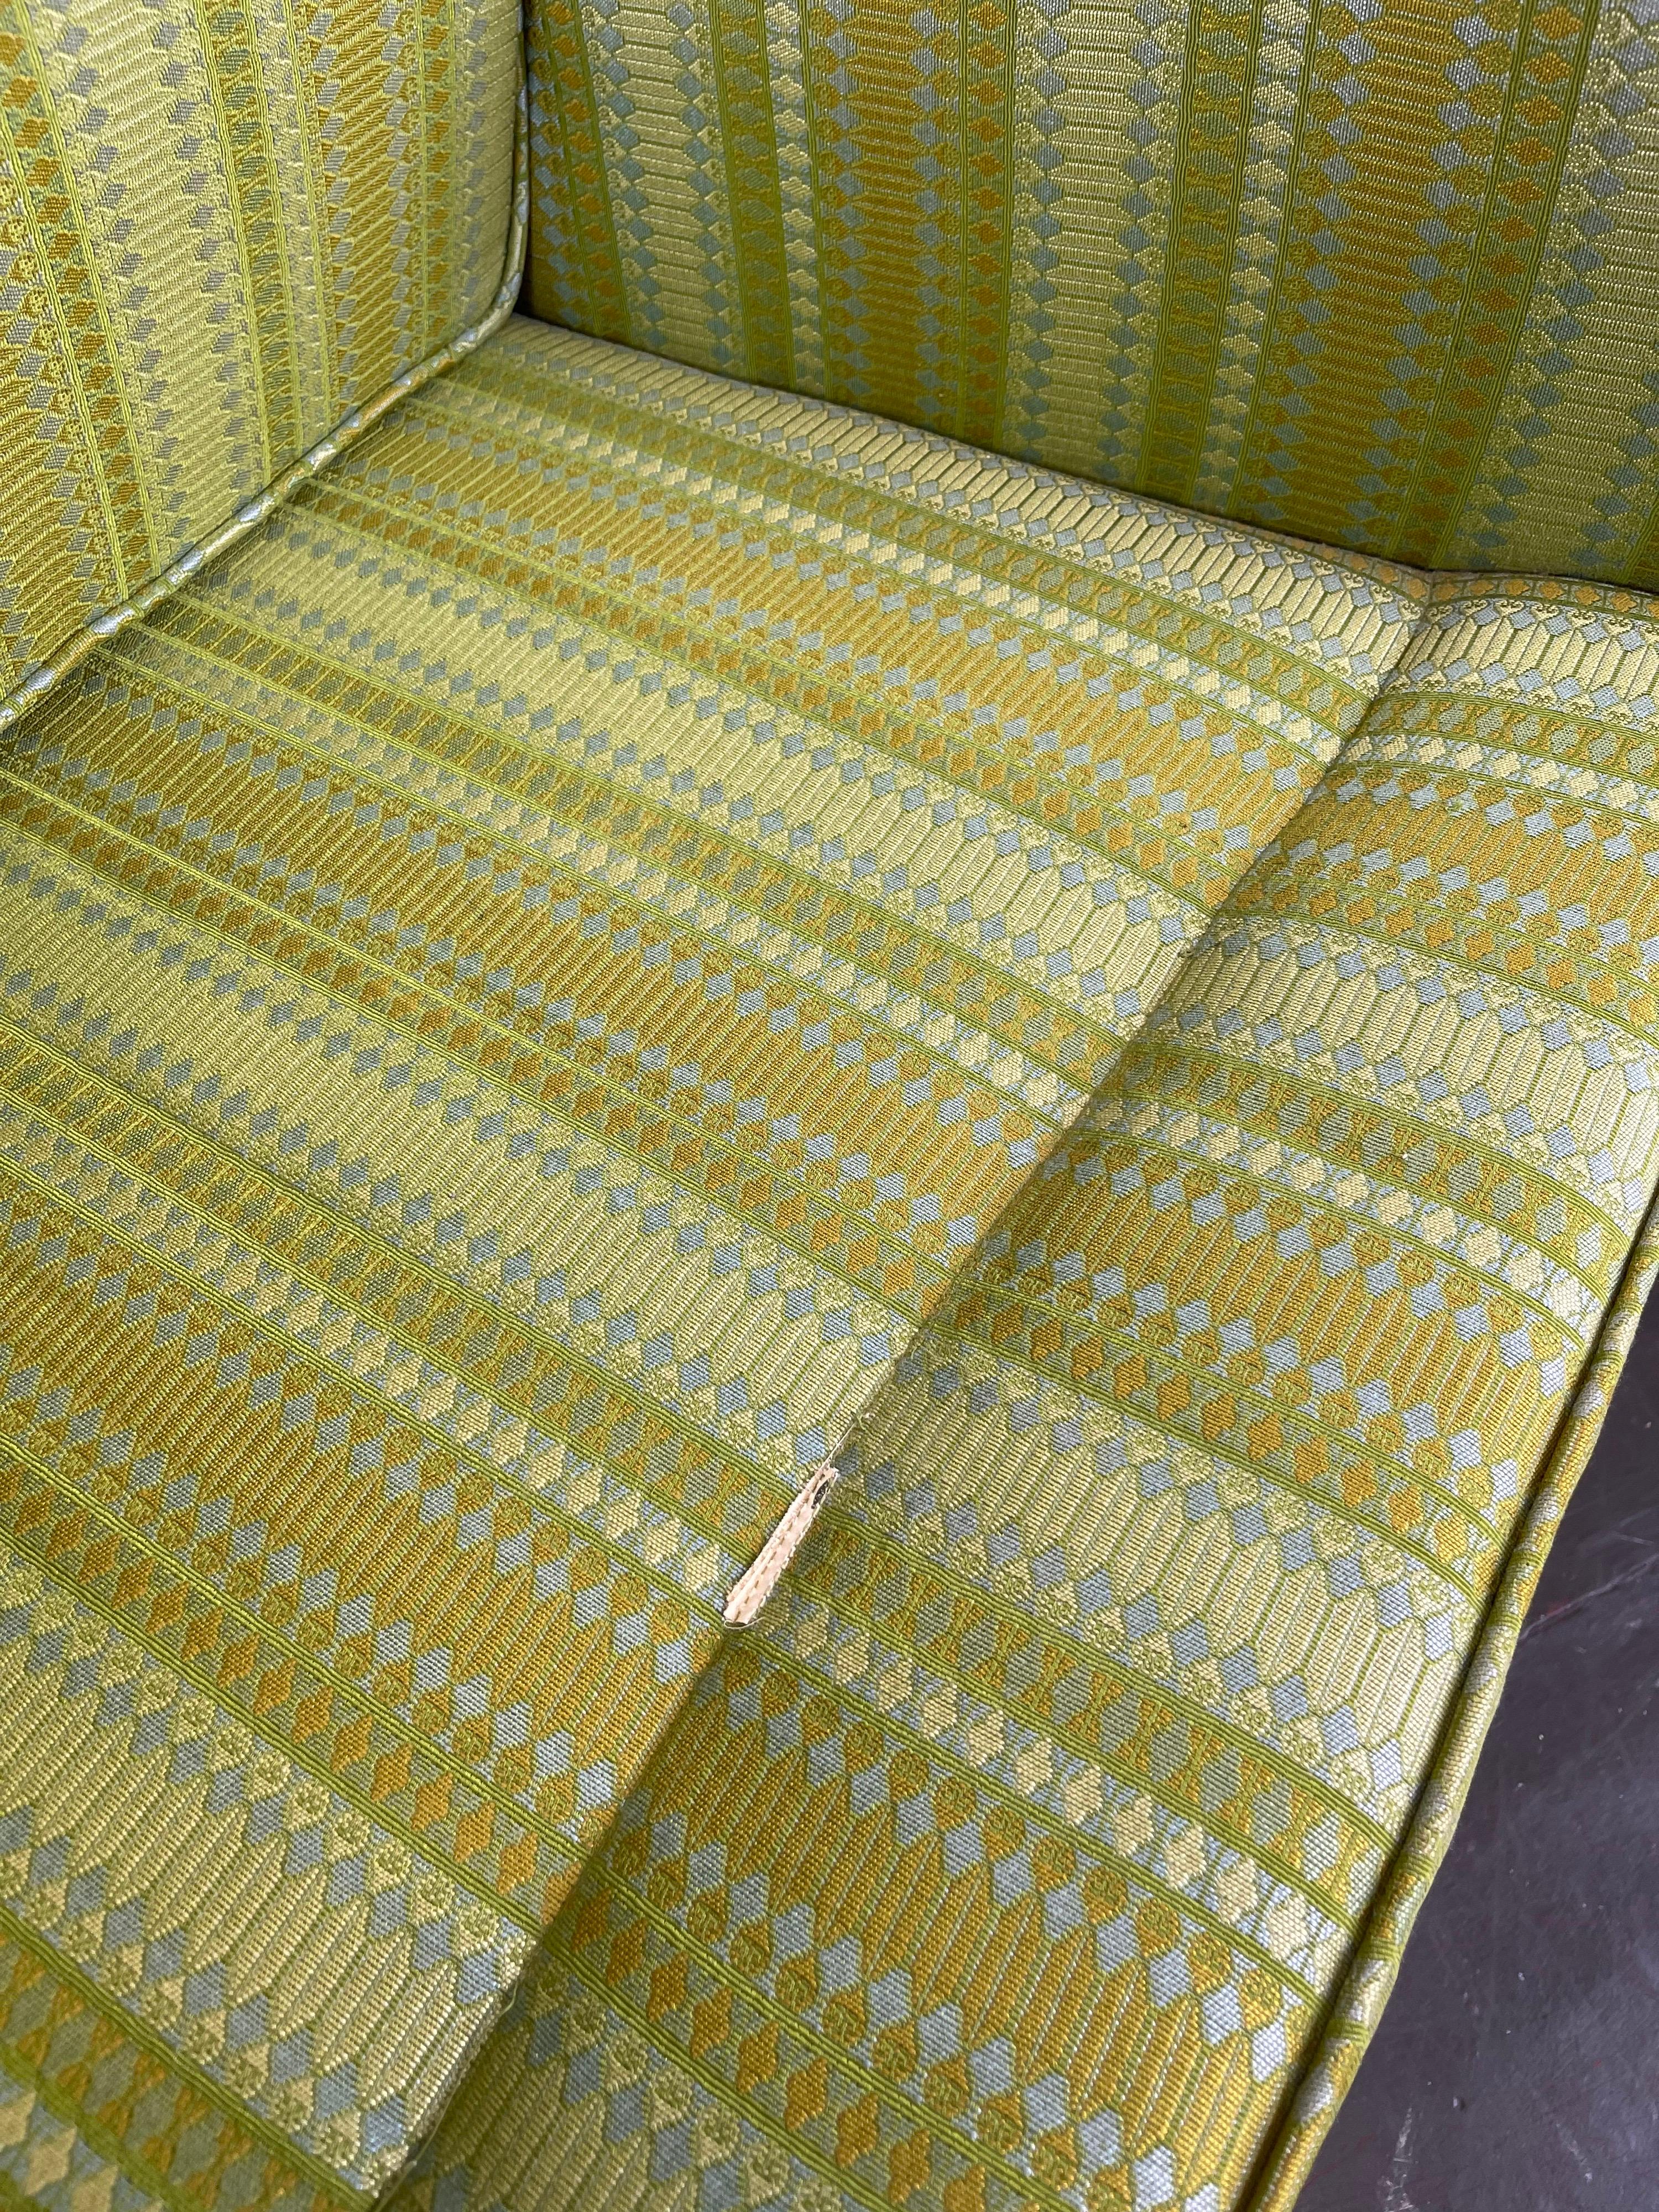 Throne Chairs in Alexander Girard Fabric by Edward Axel Roffman for B. Altman's  4